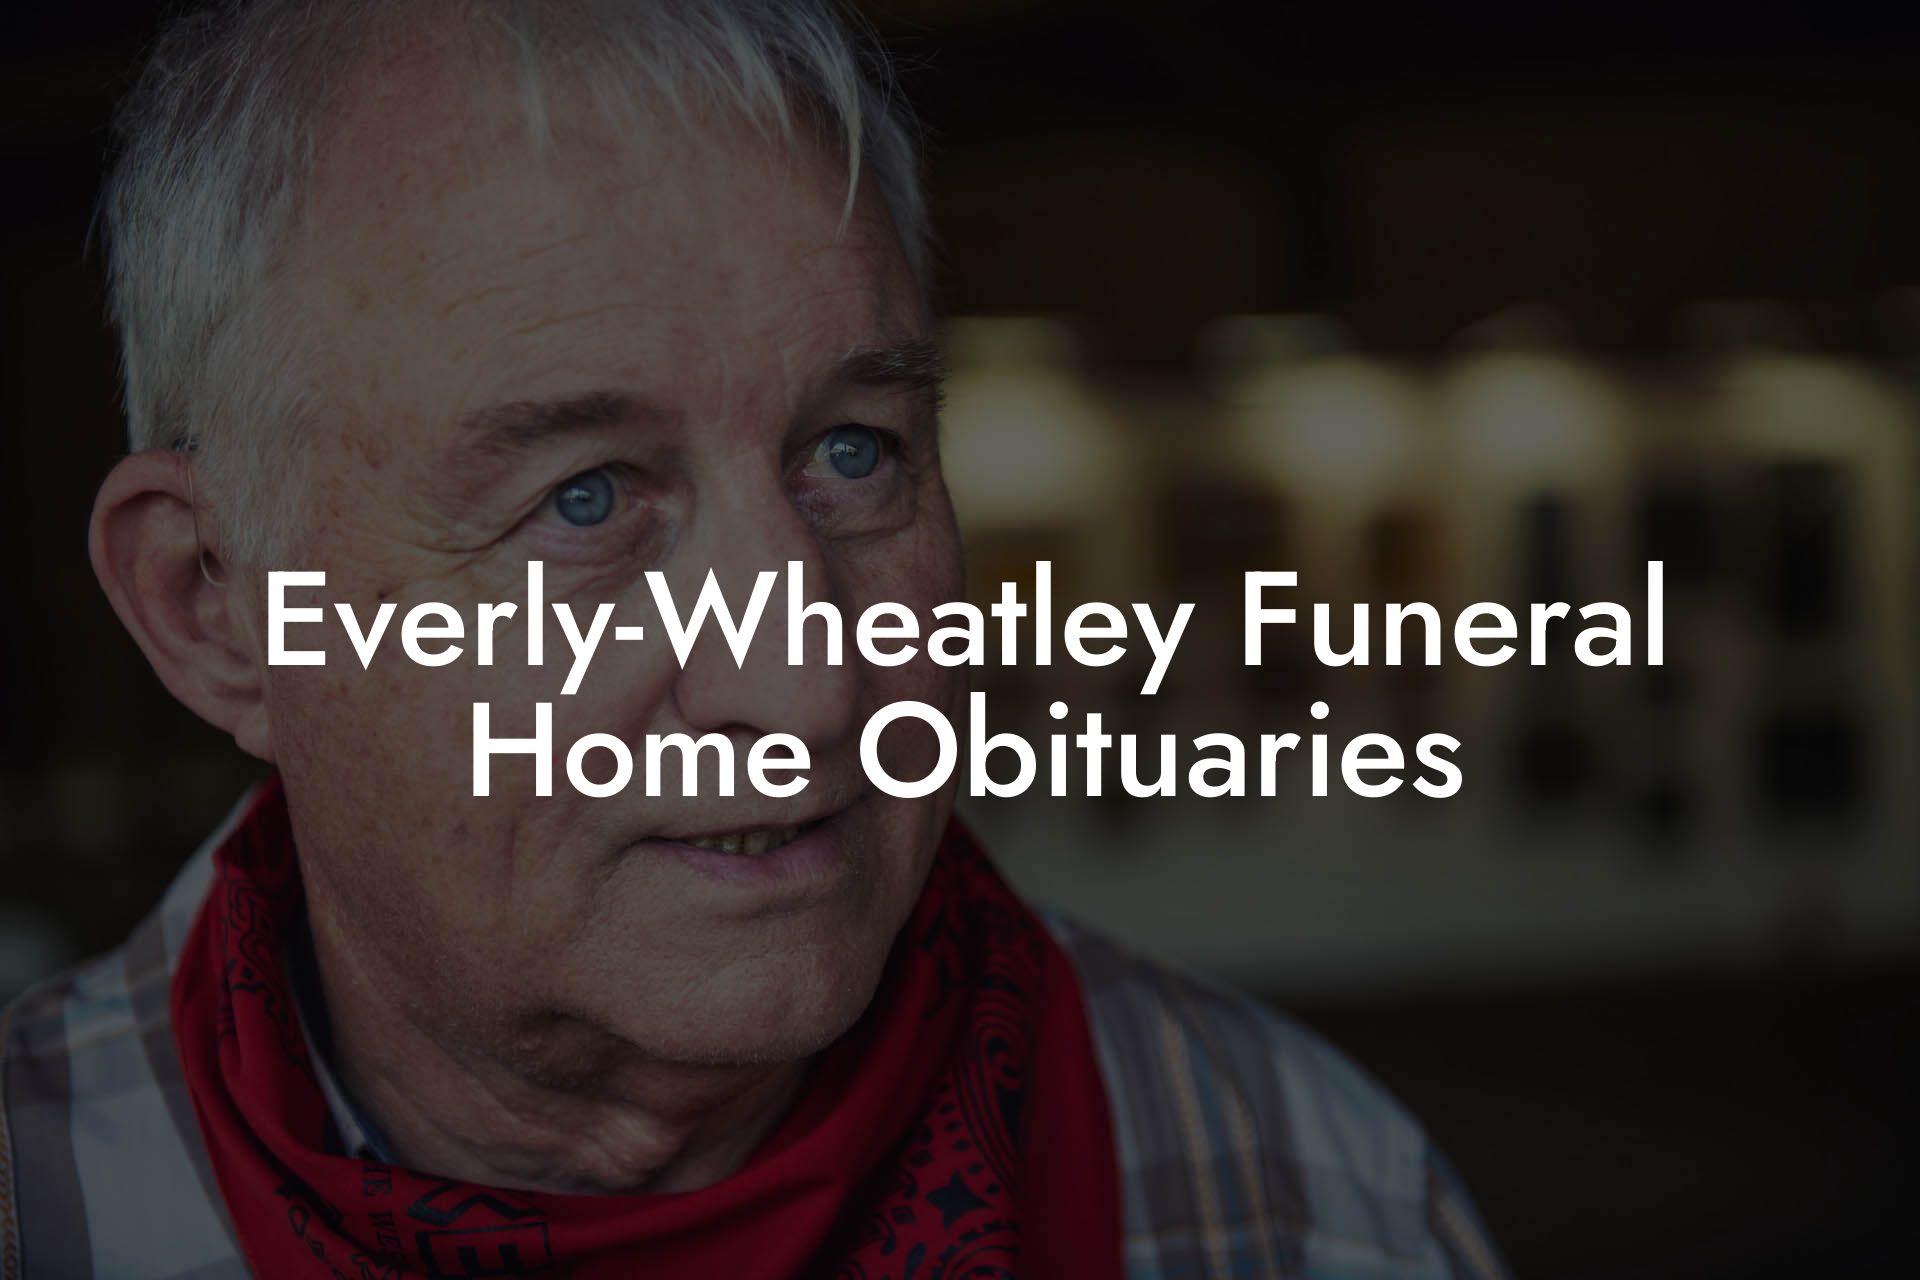 Everly-Wheatley Funeral Home Obituaries